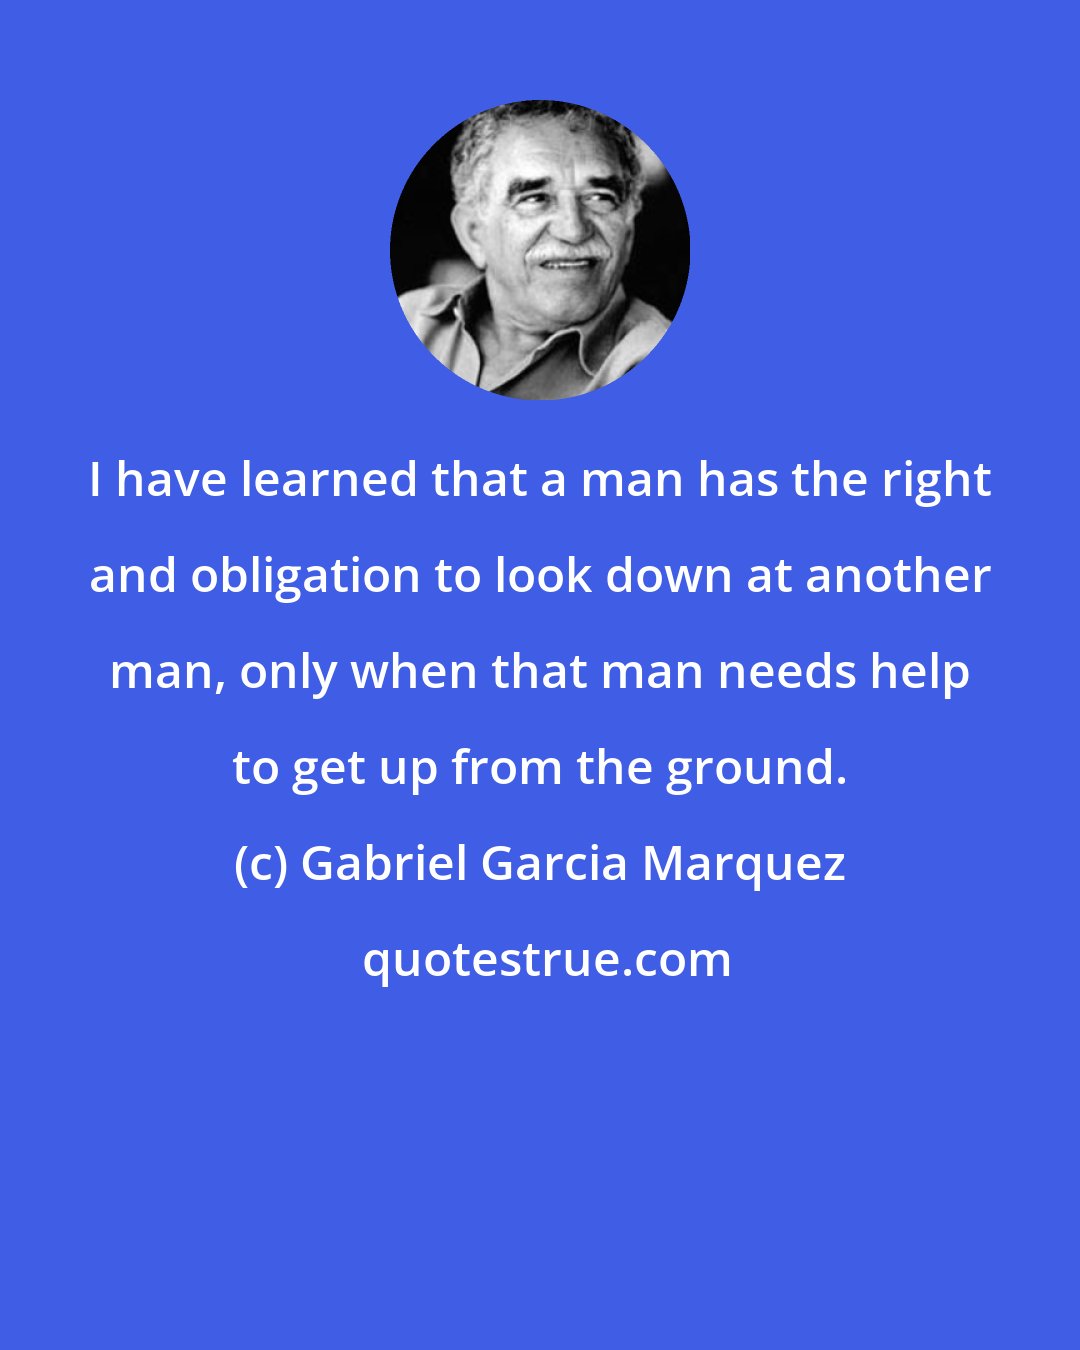 Gabriel Garcia Marquez: I have learned that a man has the right and obligation to look down at another man, only when that man needs help to get up from the ground.